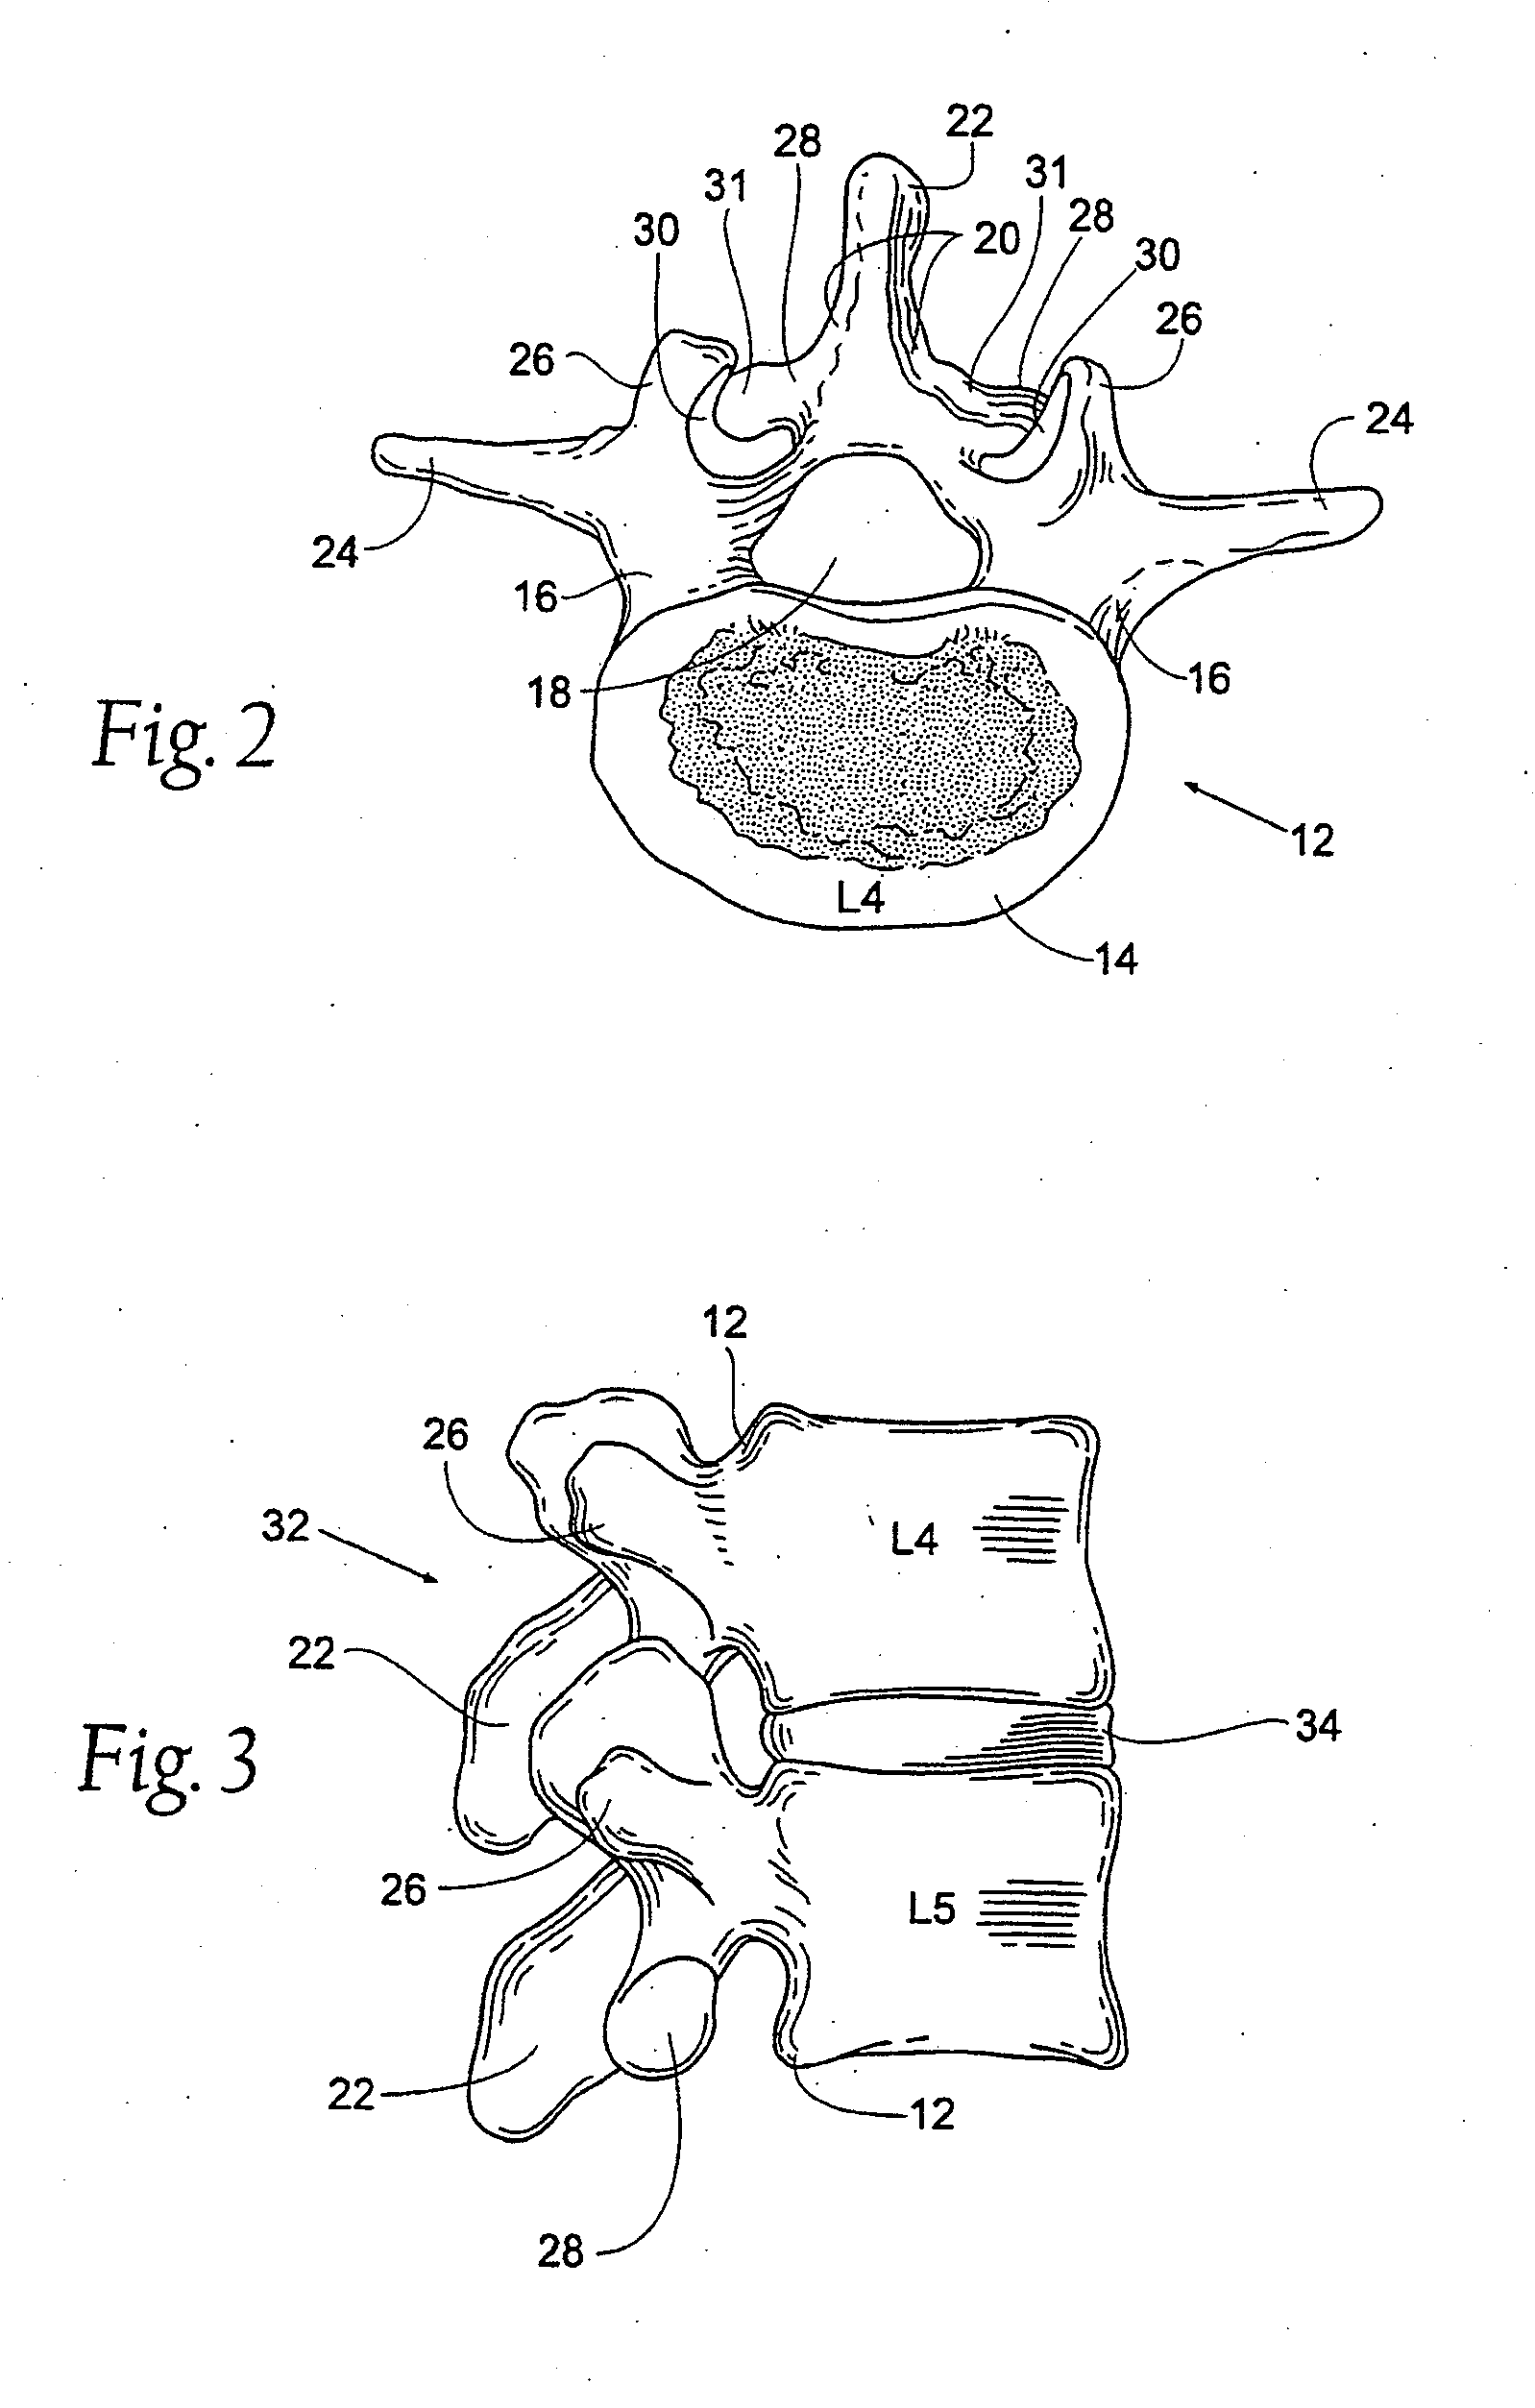 Prostheses, Systems and Methods for Replacement of Natural Facet Joints With Artificial Facet Joint Surfaces